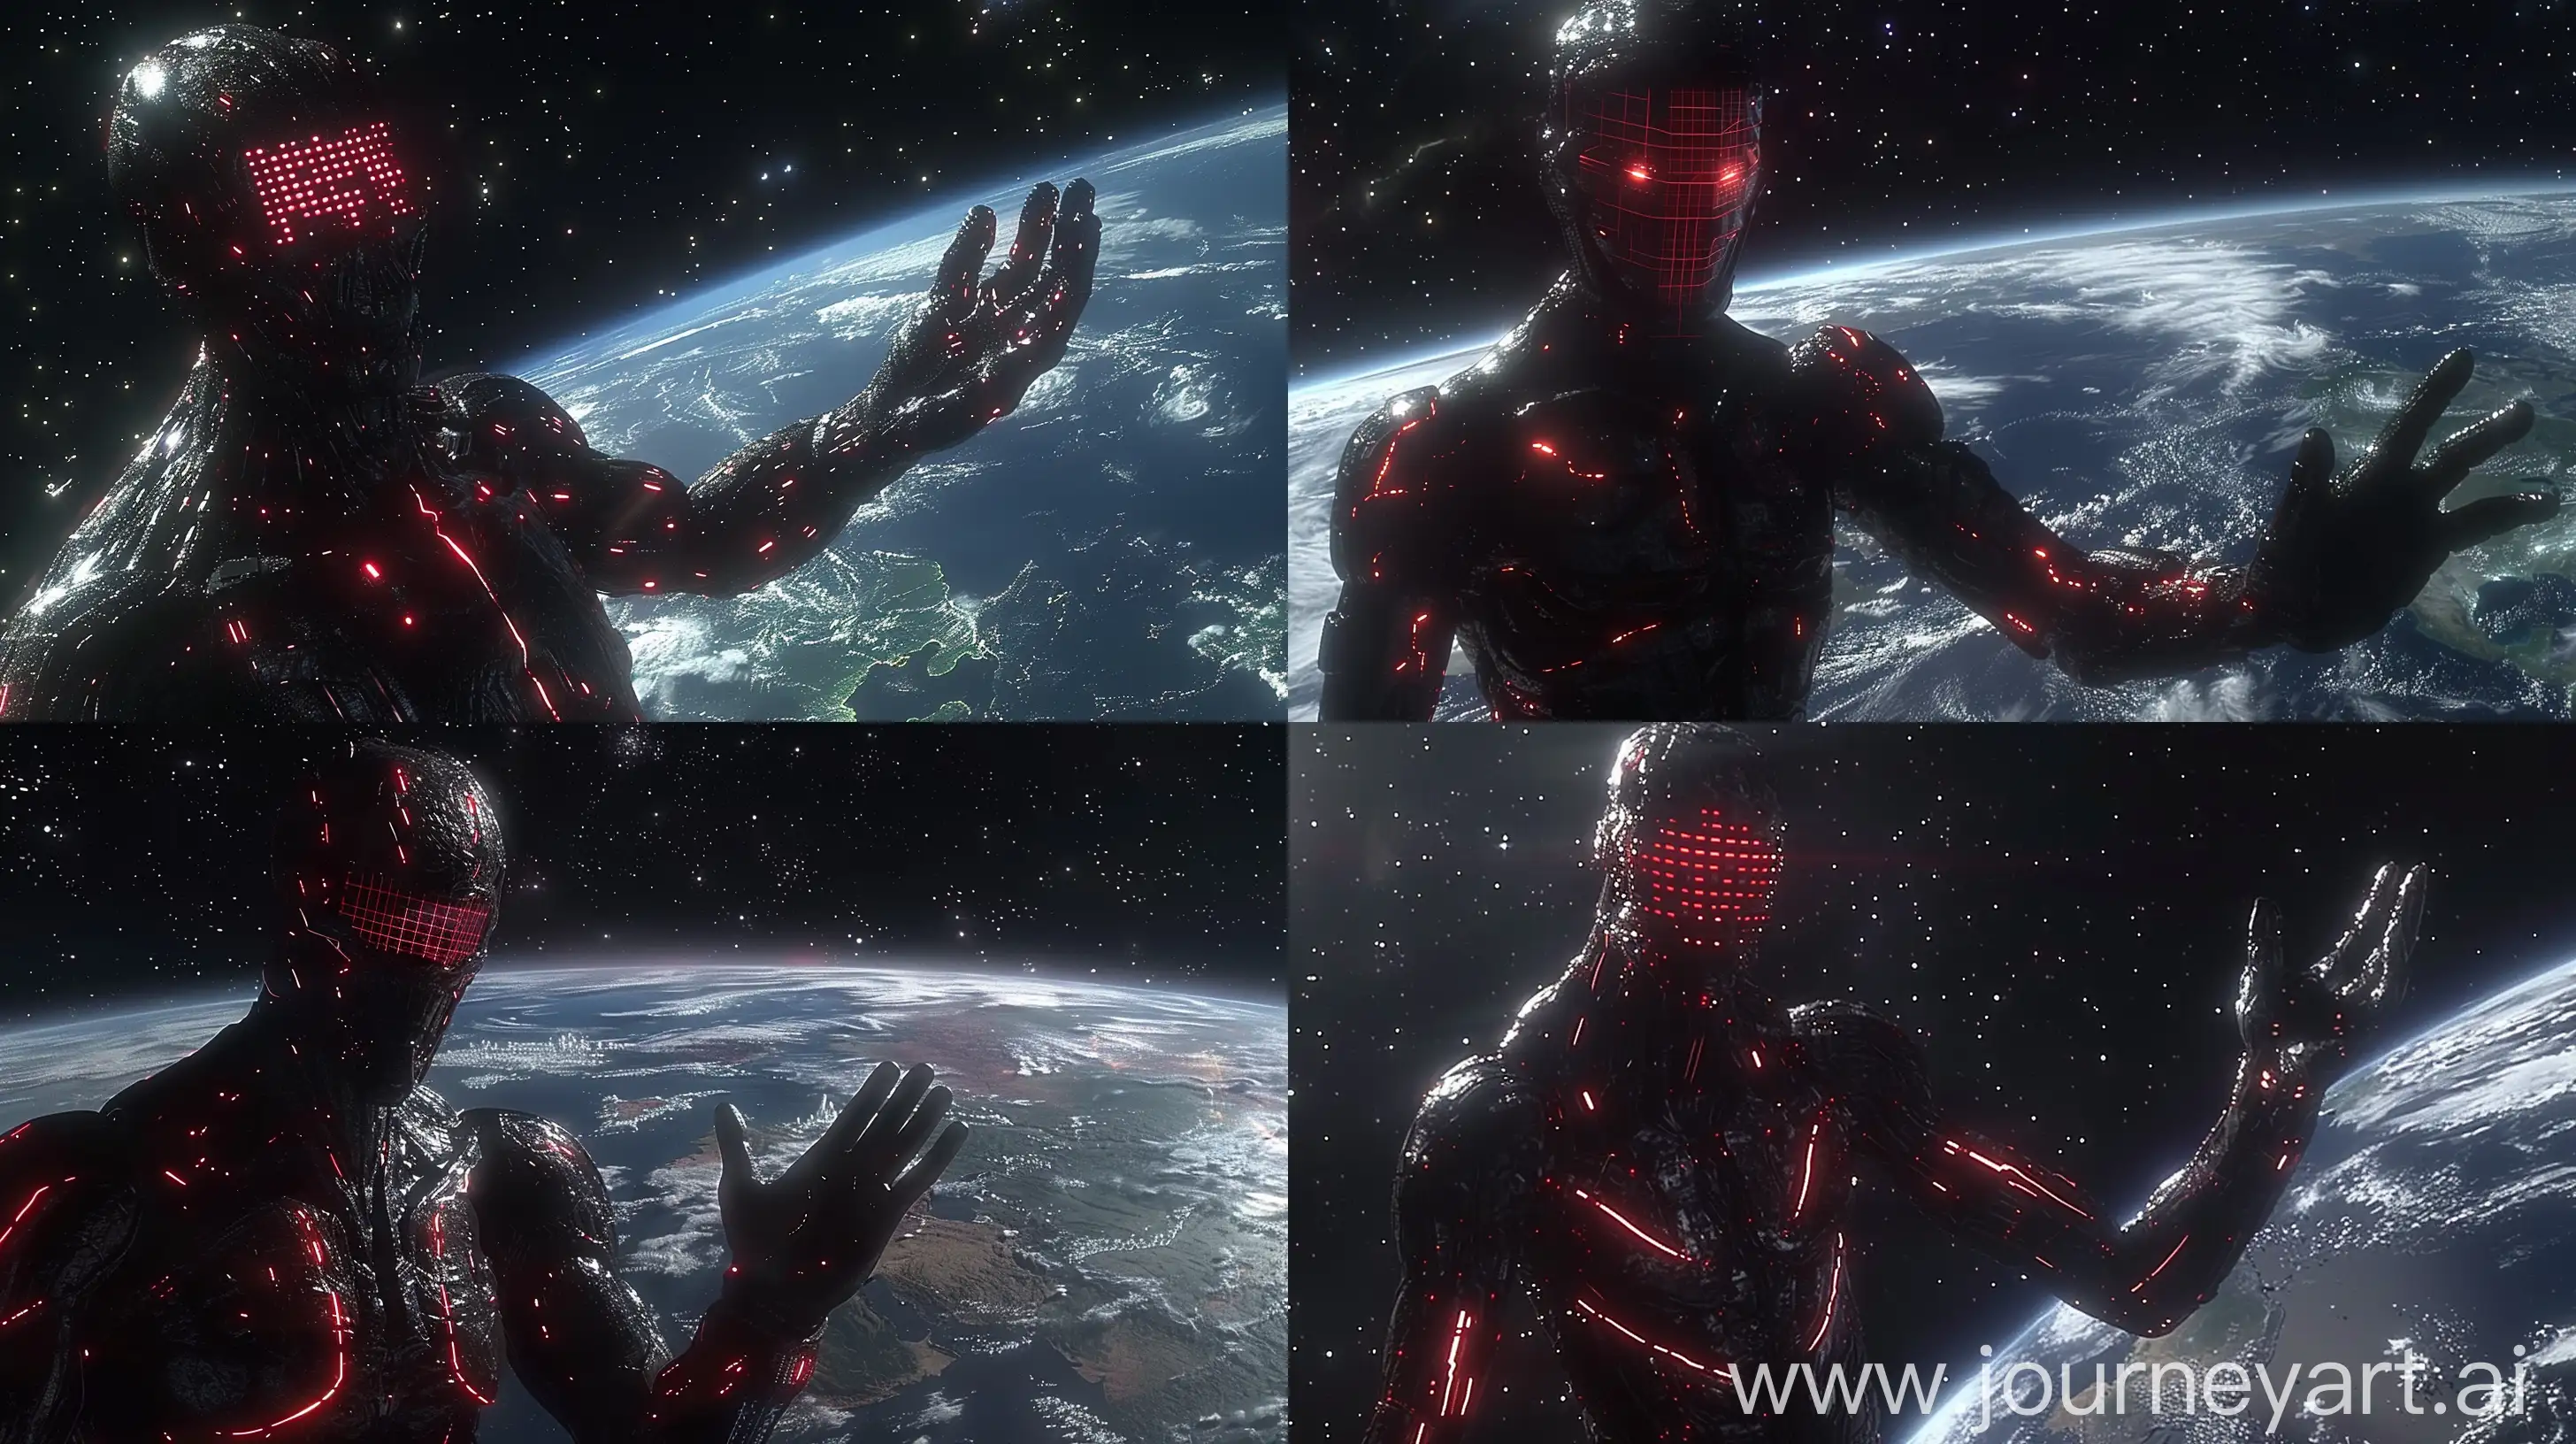  colossal humanoid figure in space overlooking Earth, dark metallic body with red glowing streaks, grid-like red eyes, open palm gesture, vast starry background, no text, ominous atmosphere, Earth in blues and whites, lower-right corner, cosmic guardian, sci-fi theme, high-quality digital art, intricate textures --sref https://i.postimg.cc/28Dj7CTf/In-Shot-20240525-101307597.jpg  --ar 16:9 --stylize 750 --v 6